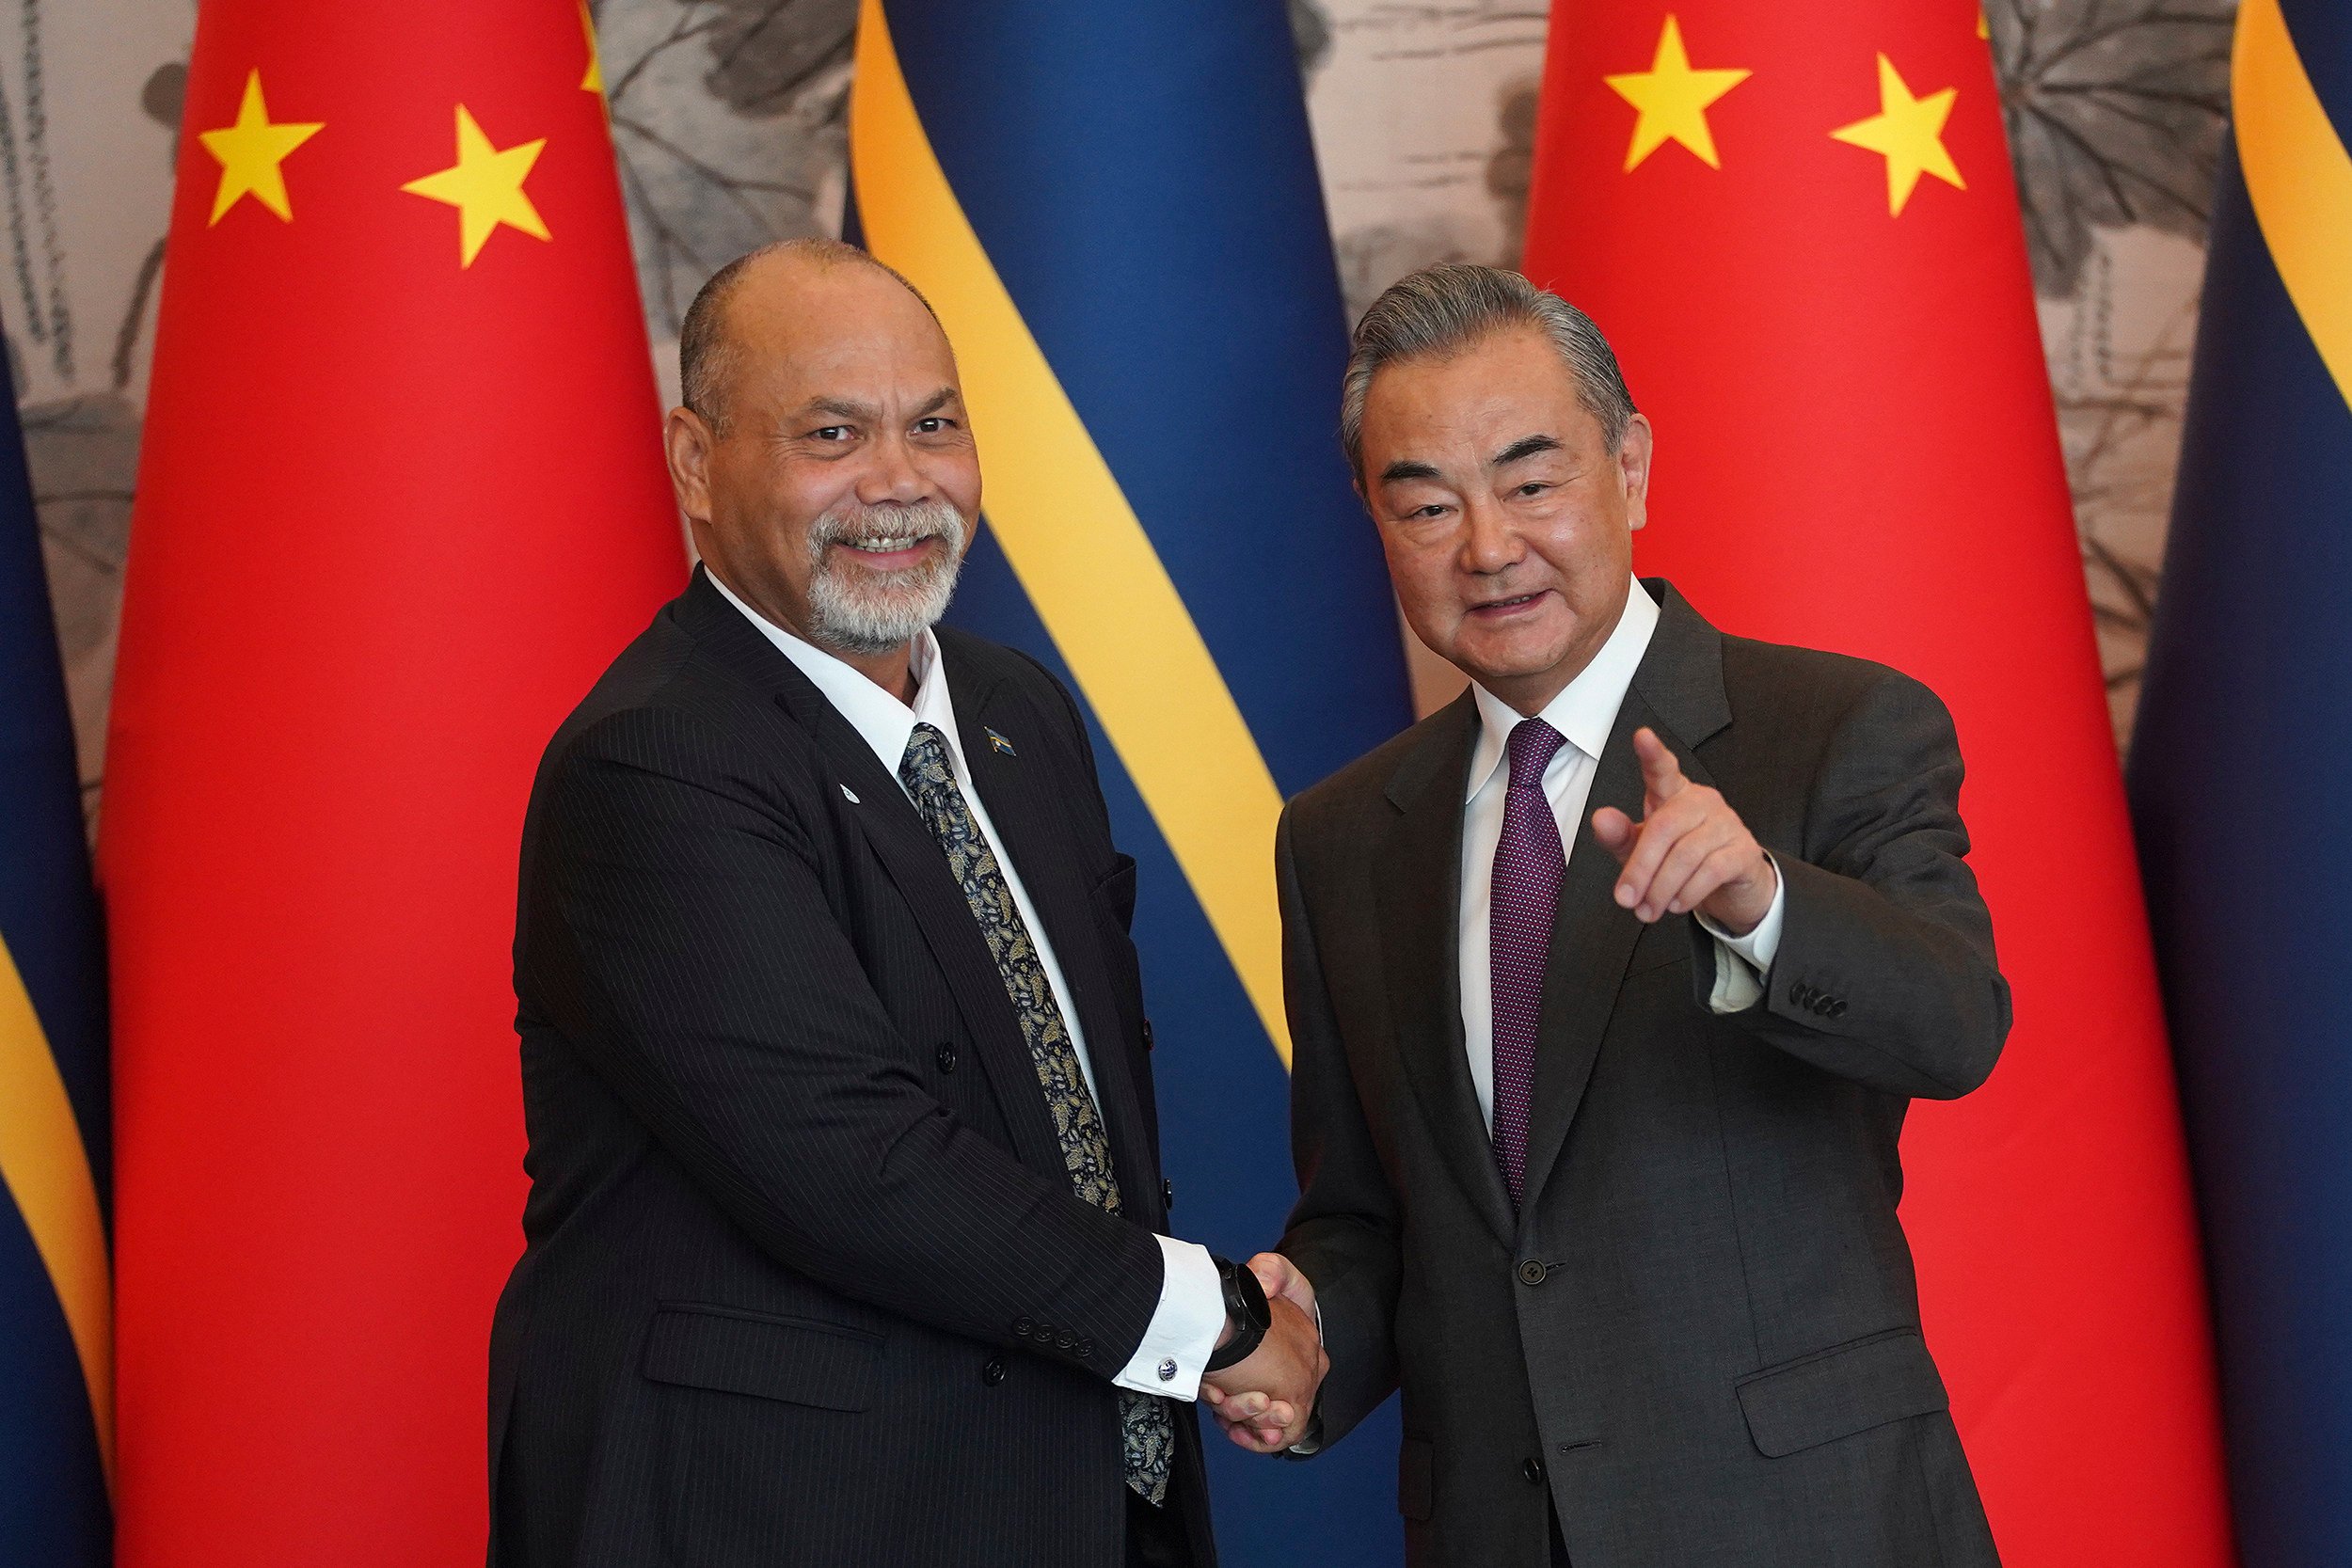 Chinese Foreign Minister Wang Yi, right, and Nauru’s Minister of Foreign Affairs and Trade Lionel Aingimea shake hands after signing a joint communique on the resumption of diplomatic relations between China and Nauru at Diaoyutai State Guesthouse in Beijing last month. Photo: AP